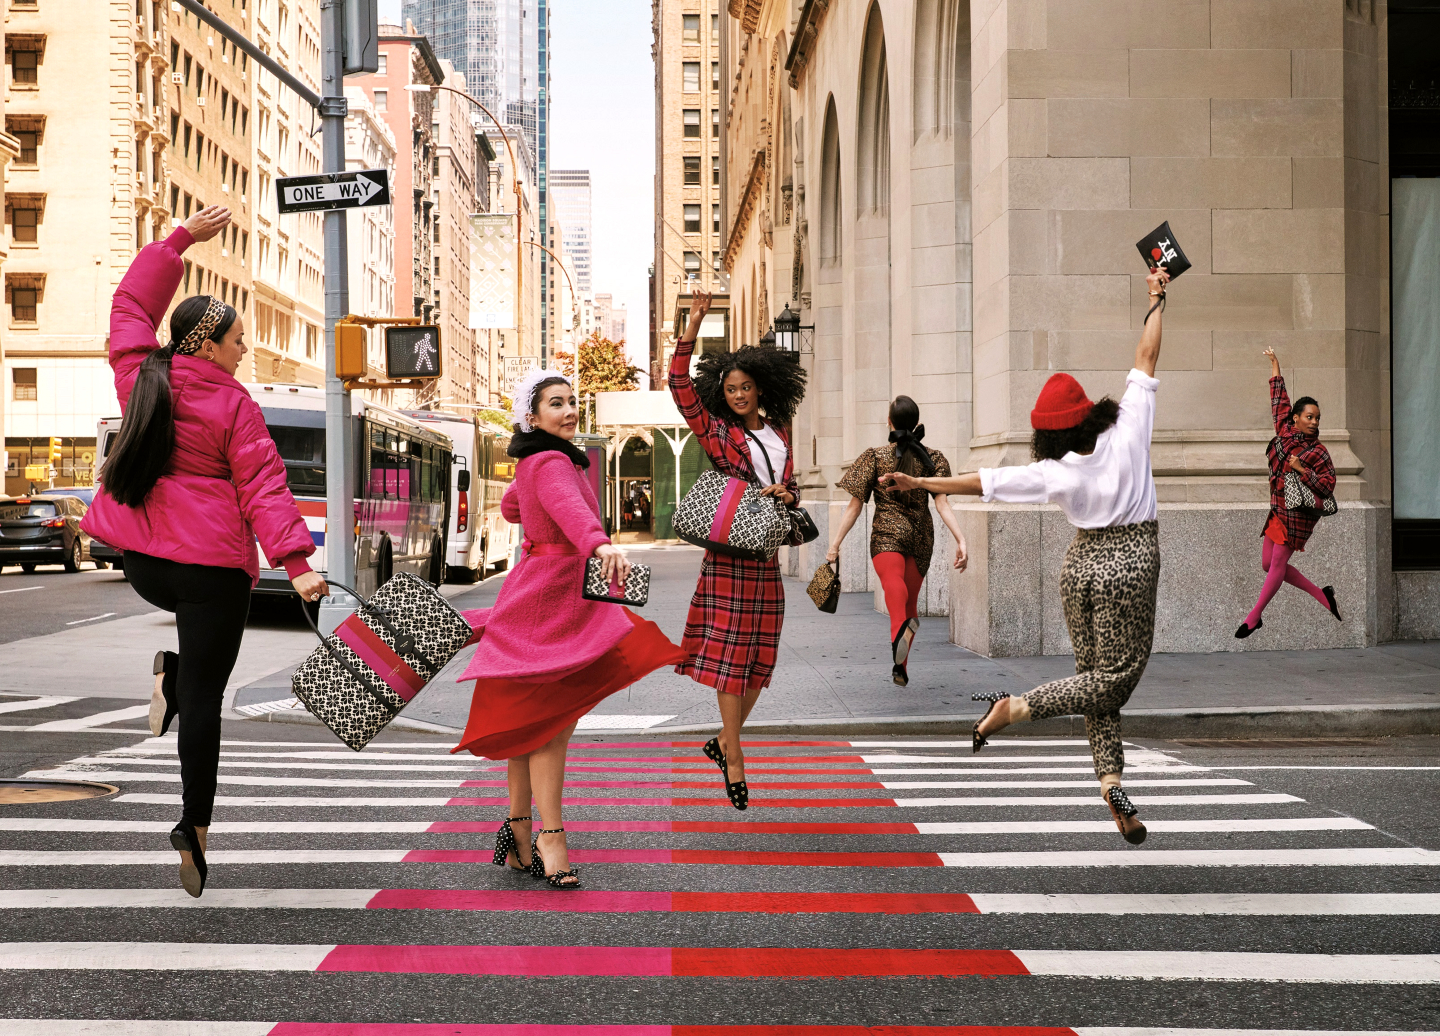 Kate Spade New York's Autumn 2021 campaign captures spirit of the